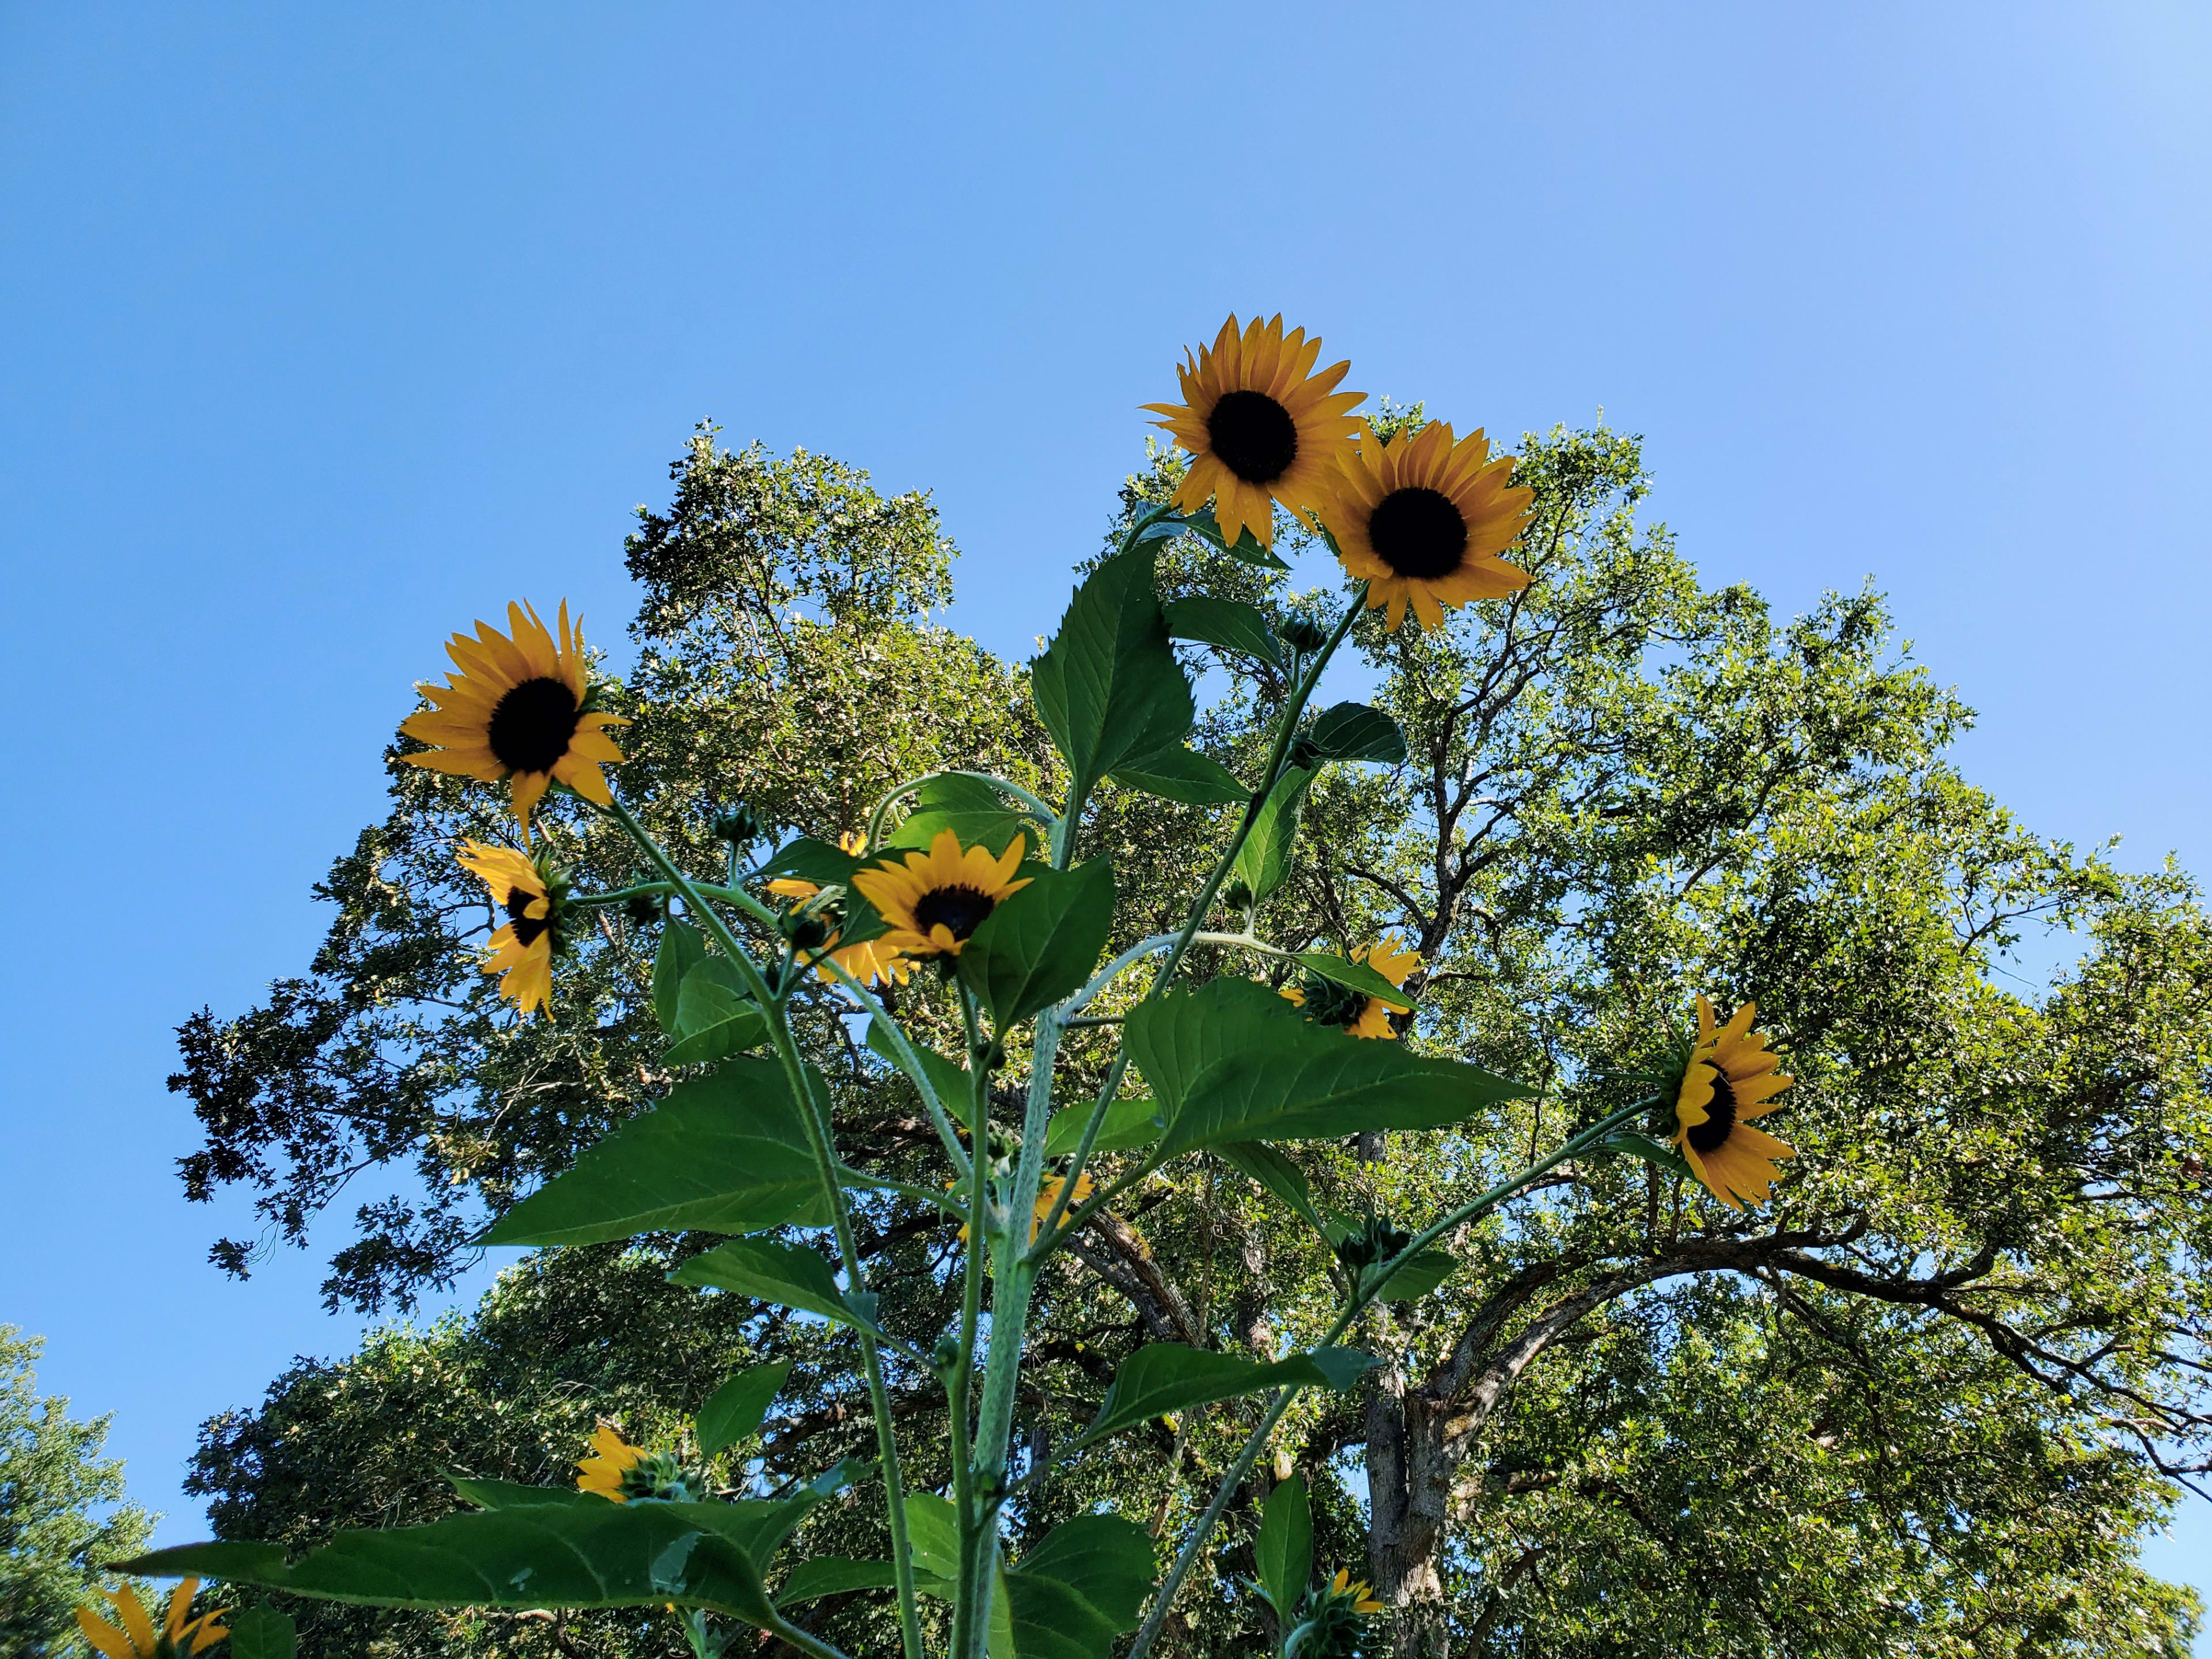 July sunflowers in bloom here